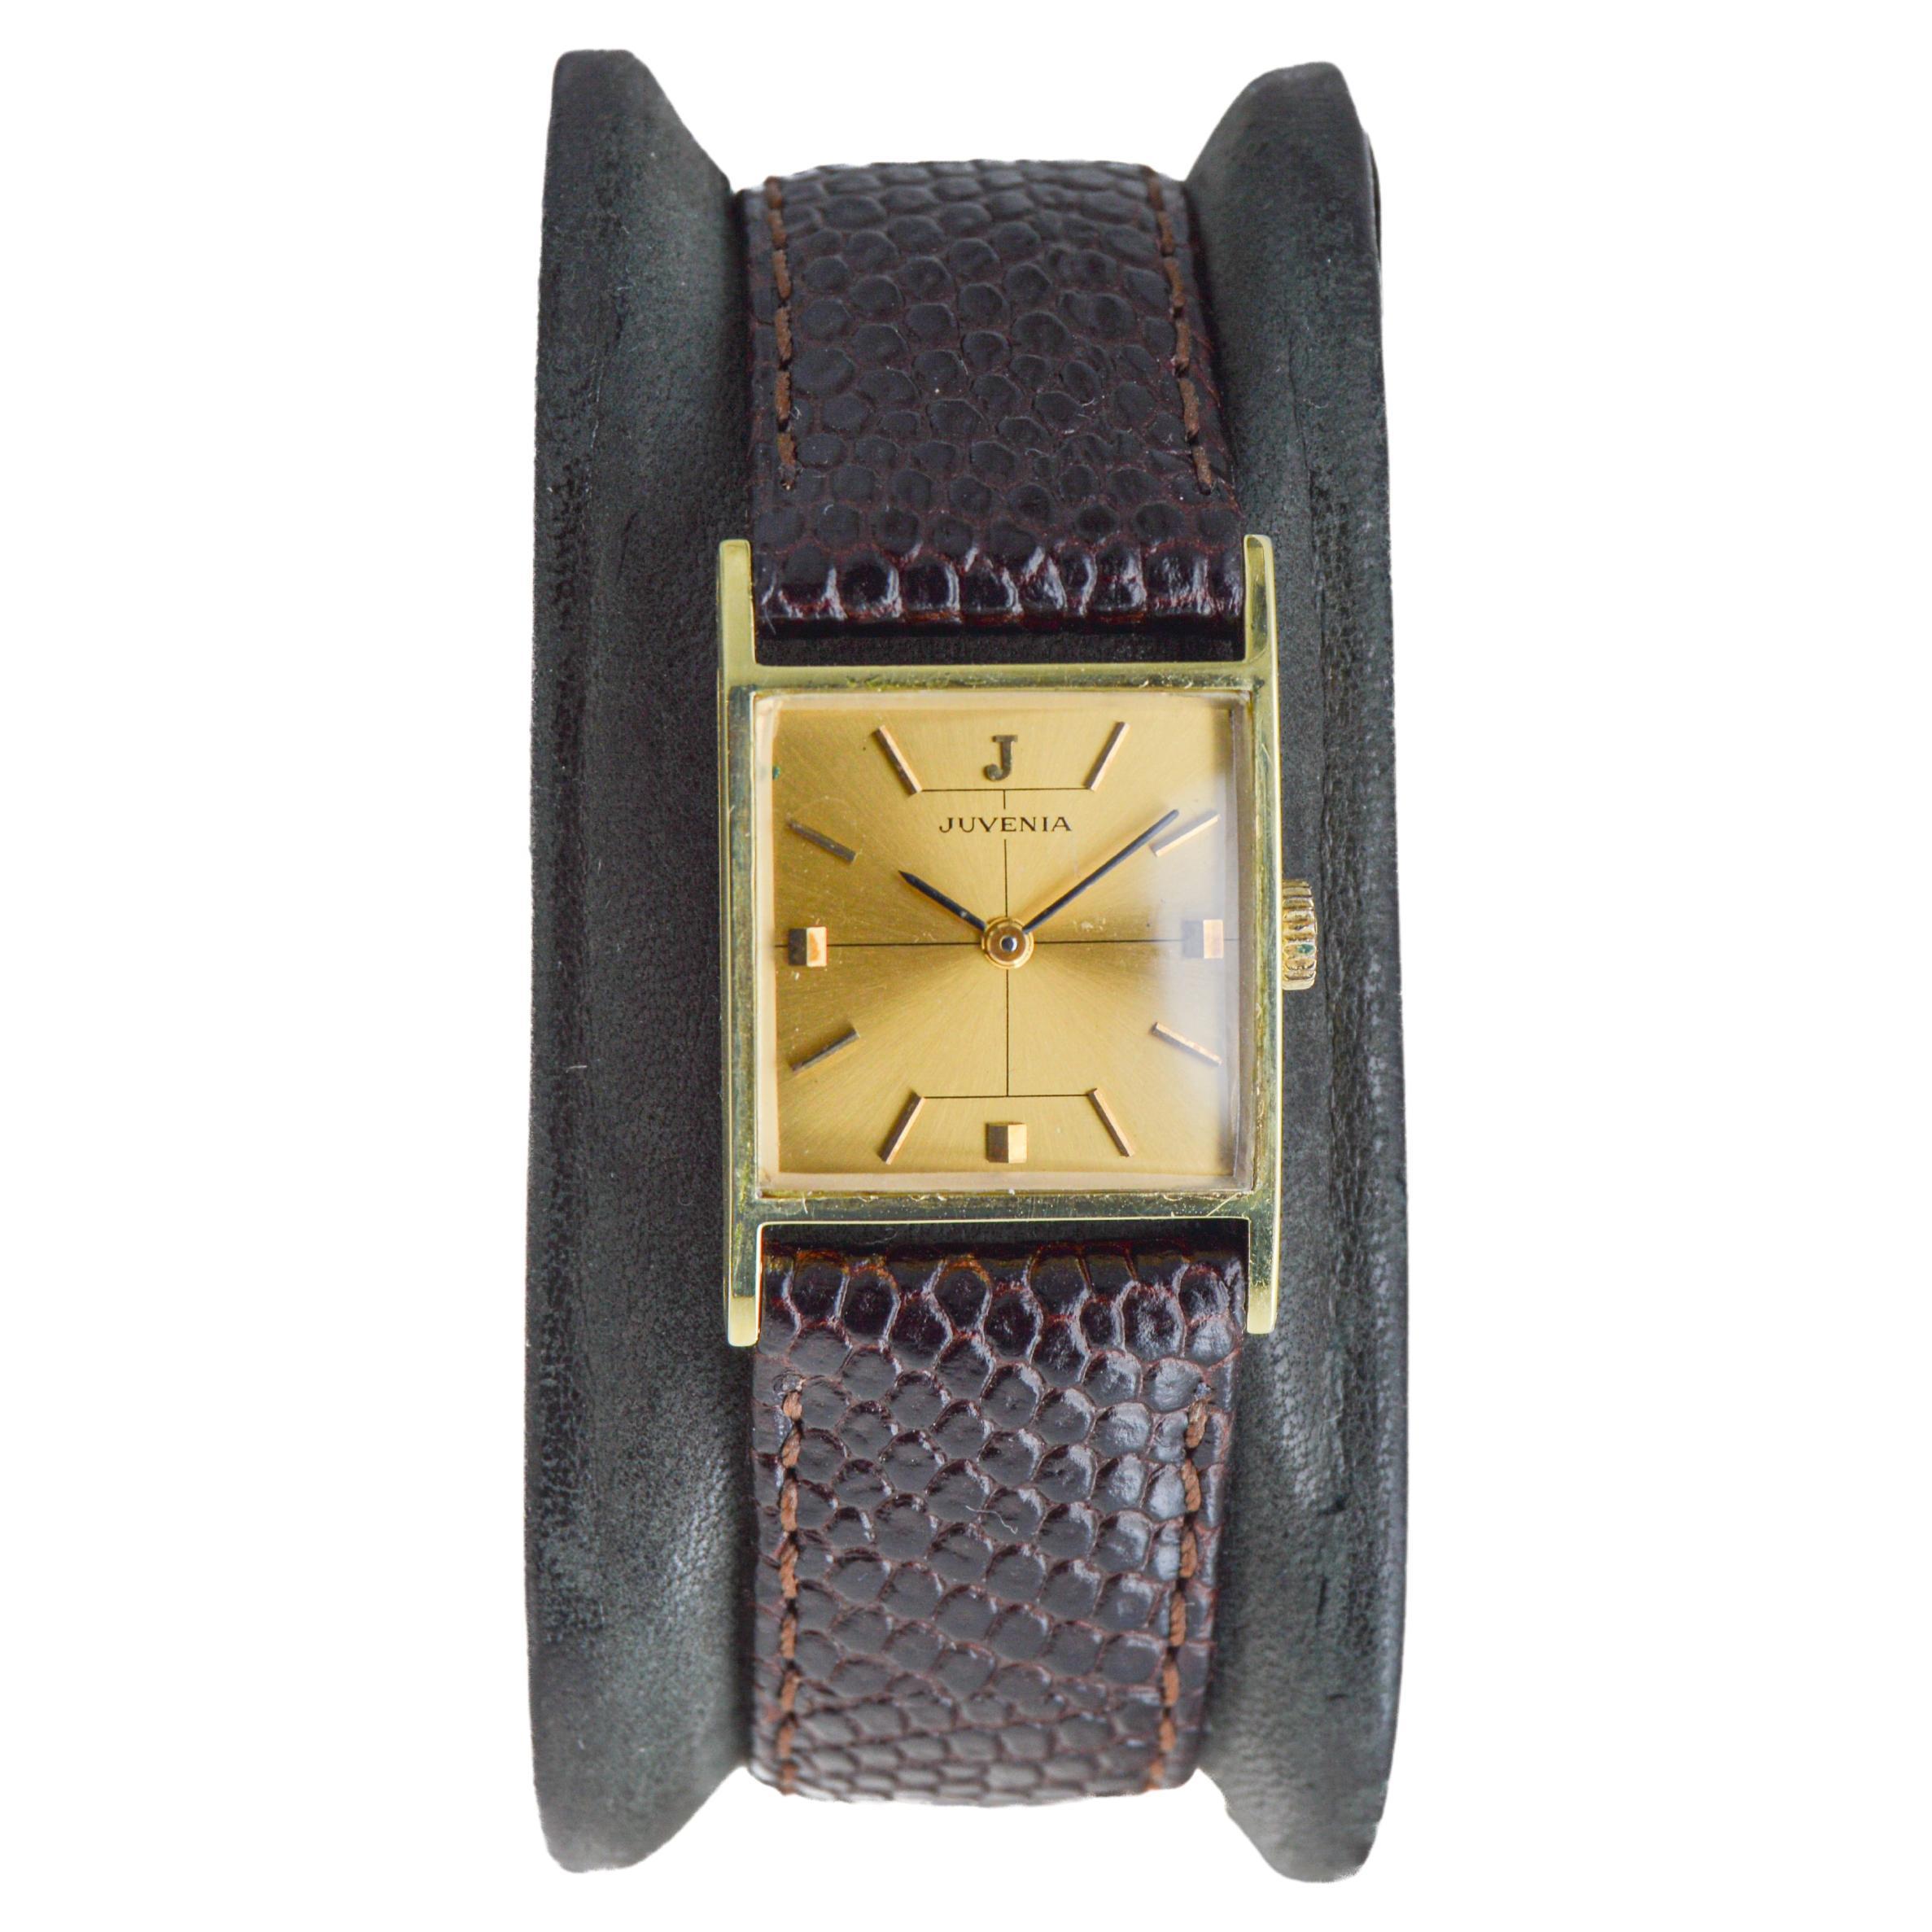 Juvenia Gold-Filled Art Deco Tank Style Watch from 1950's High Grade